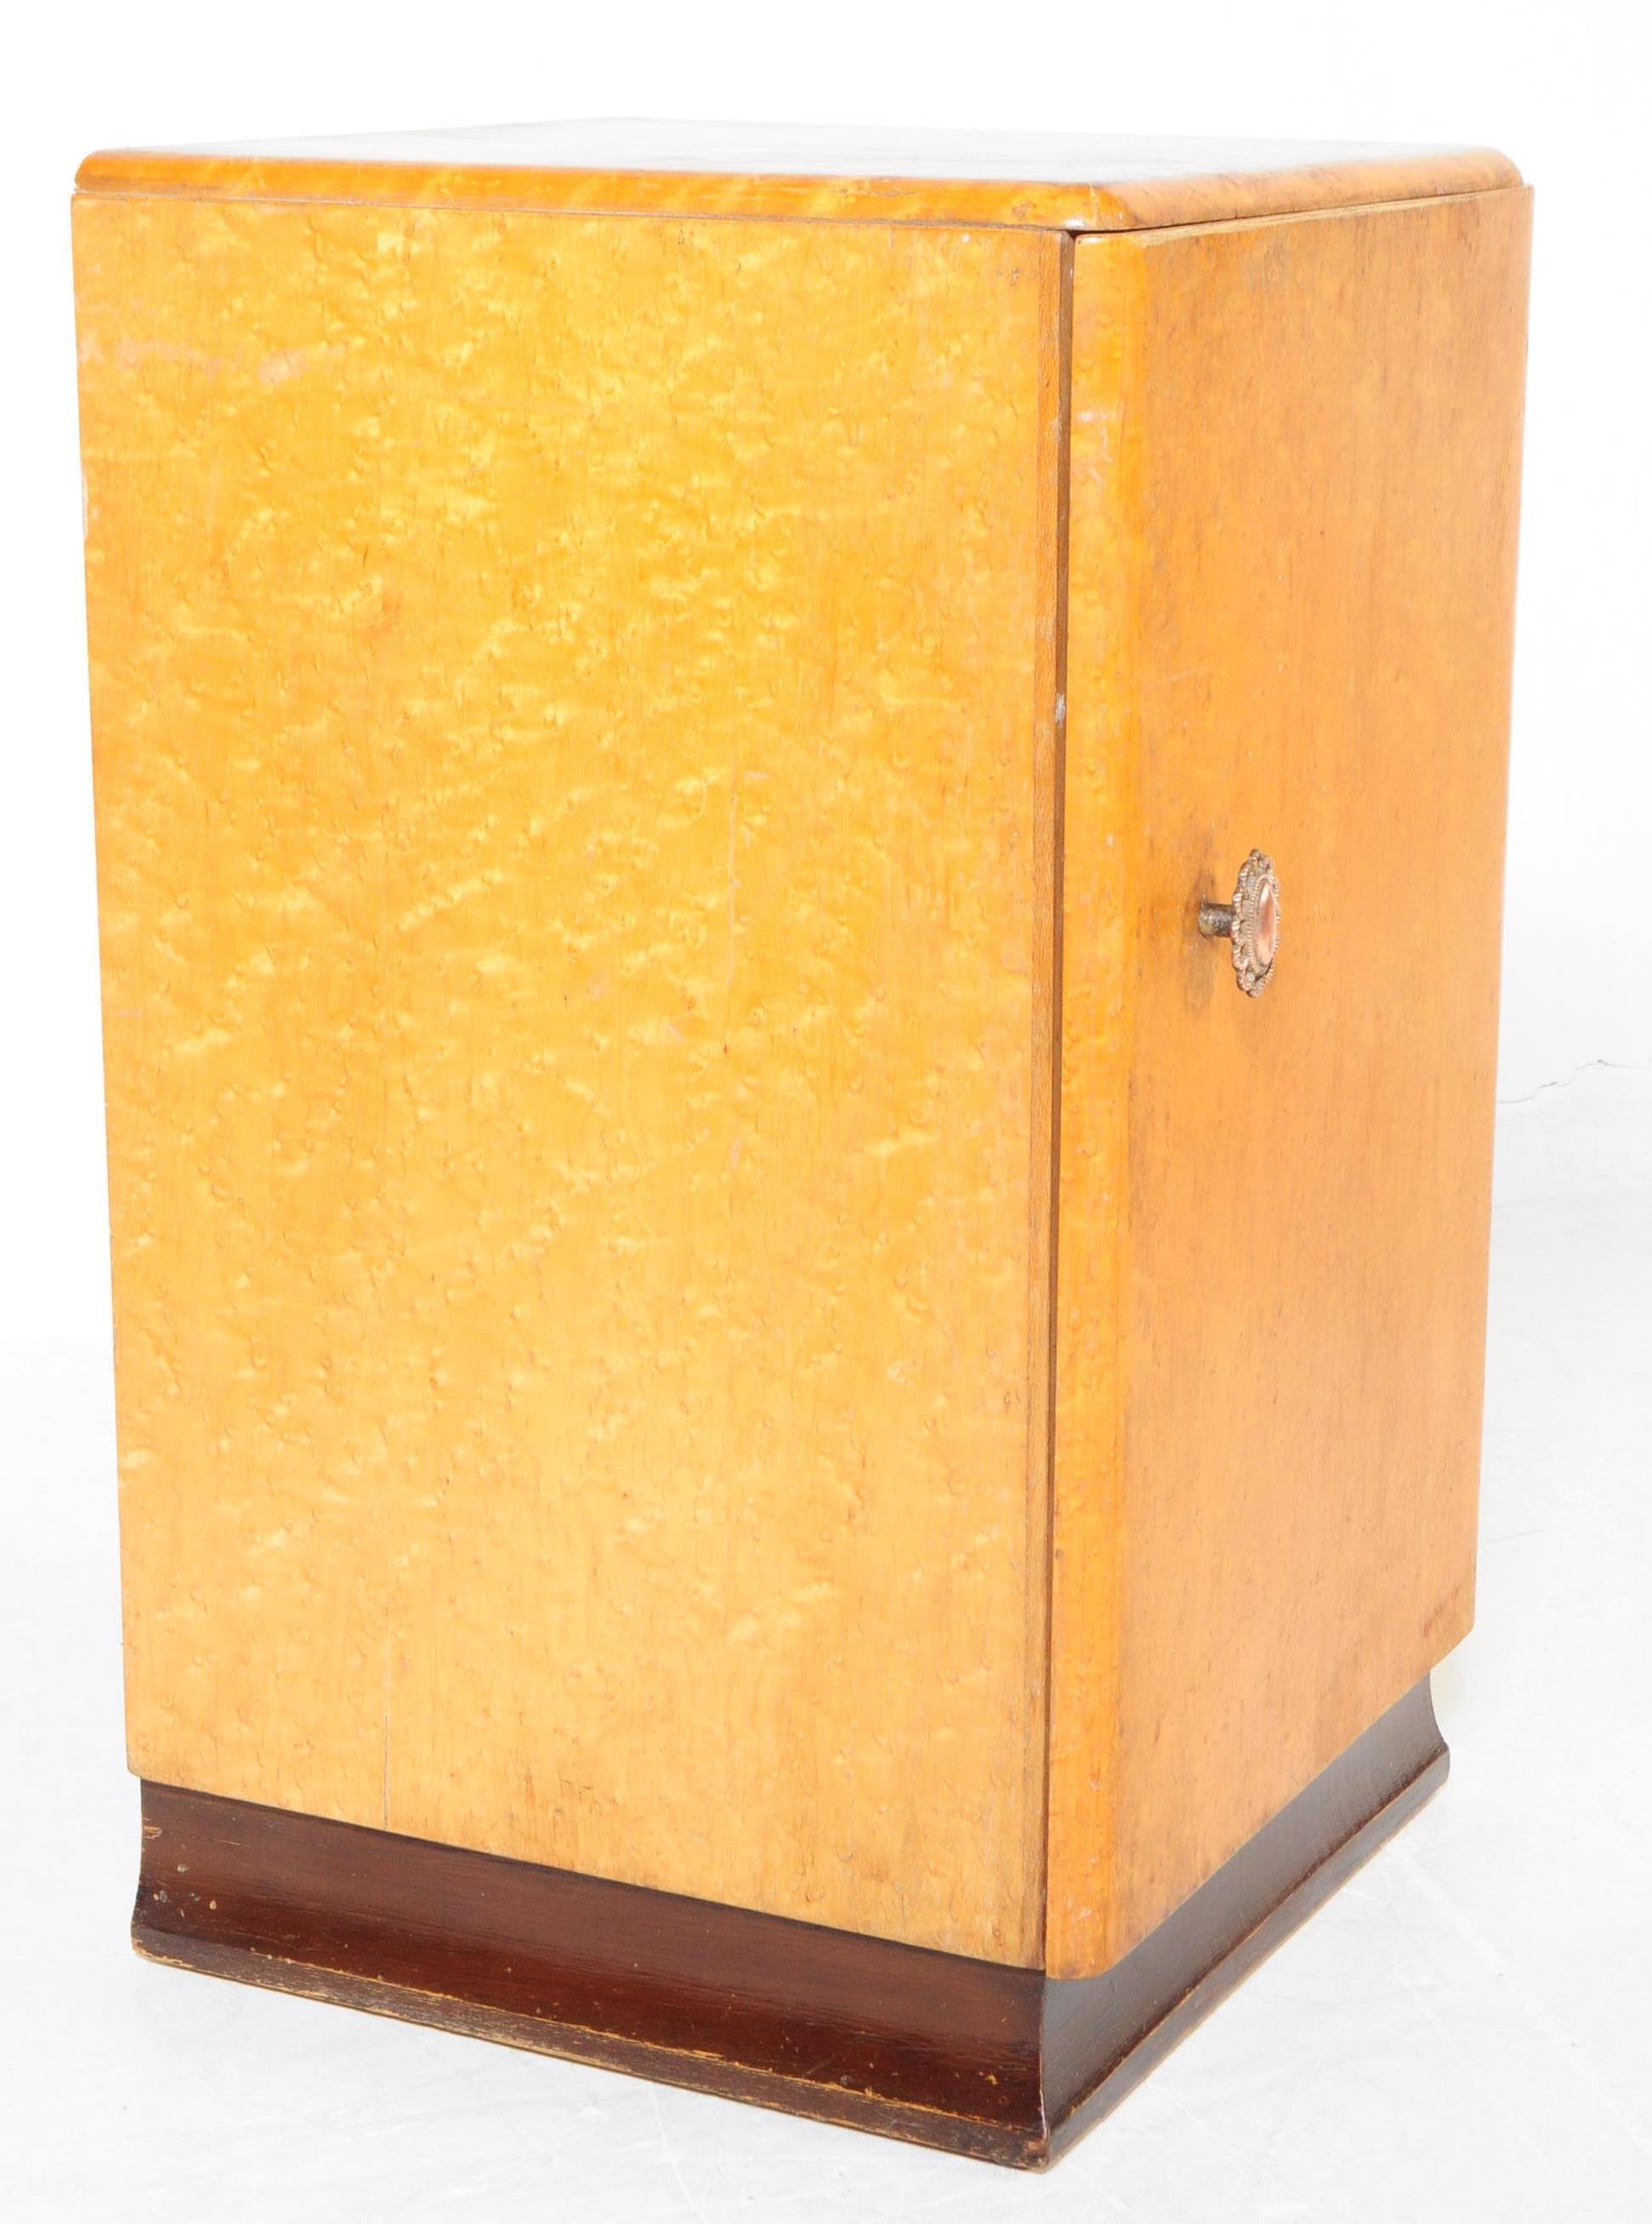 PAIR OF ART DECO BIRDSEYE MAPLE BEDSIDE CABINETS - Image 2 of 5